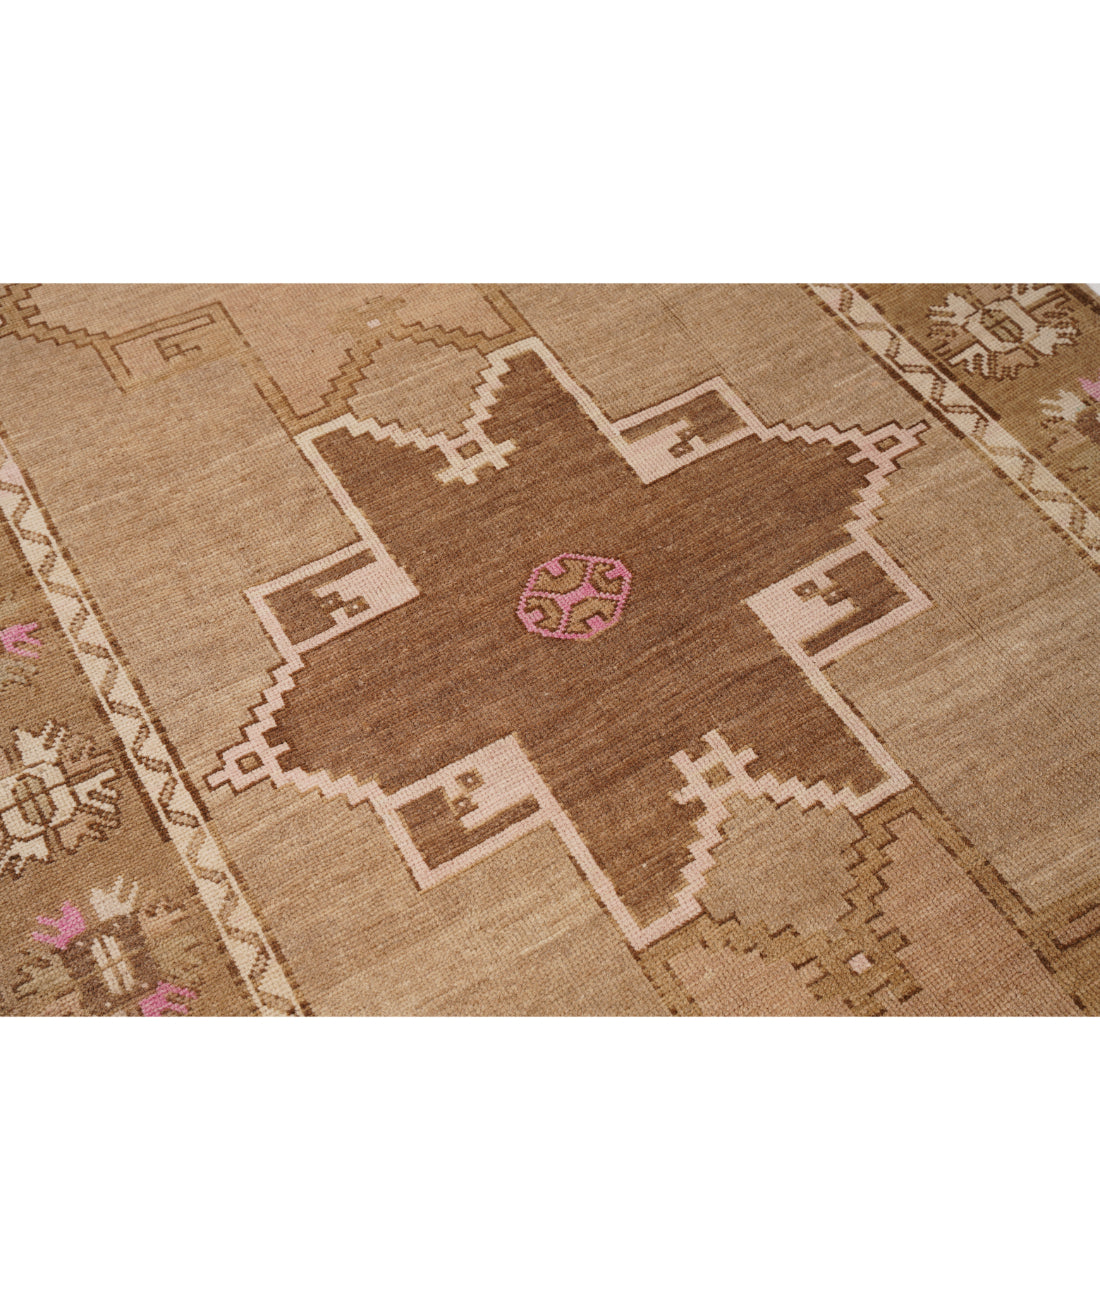 Anatolian 4' 2" X 11' 9" Hand-Knotted Wool Rug 4' 2" X 11' 9" (127 X 358) / Taupe / Brown